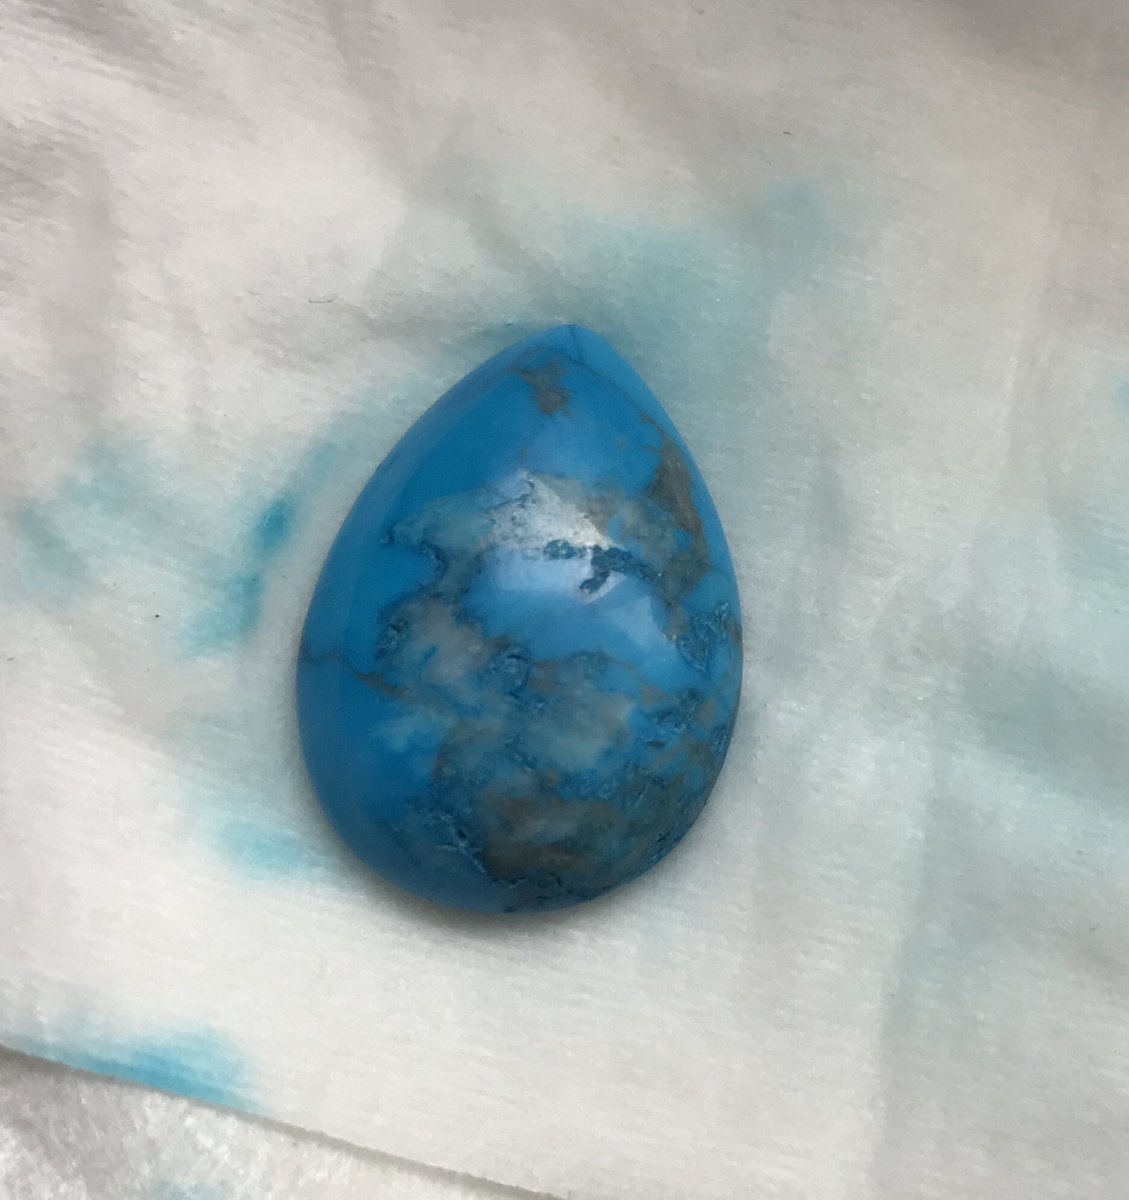 Next up, ALL THE TURQUOISE IS DYED. Specifically they’re dyed howlite, in one pic I show you a comparison of howlite regular and dyed. The color is cheap and will come off on a napkin with rubbing alcohol